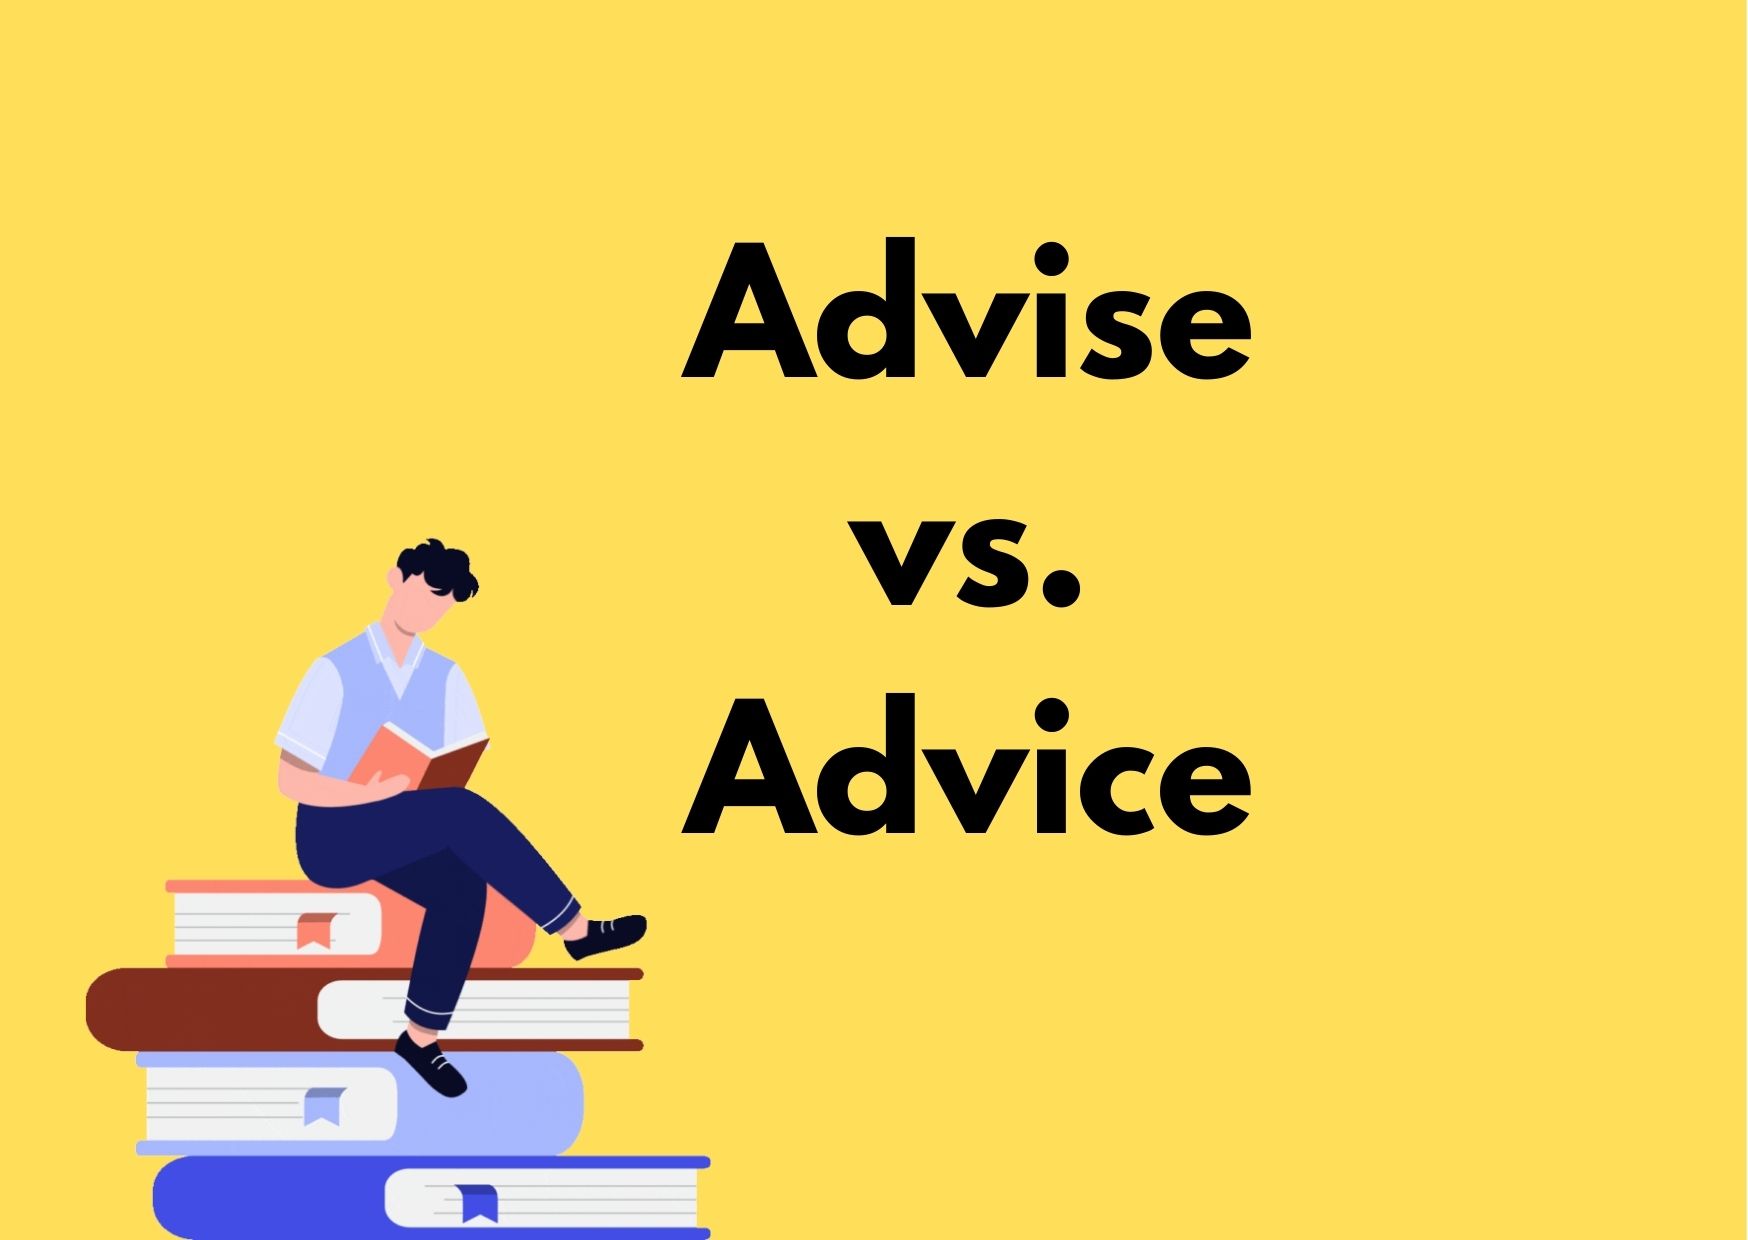 A graphic of a man on a pile of books reading and the caption "Advise vs, Advice